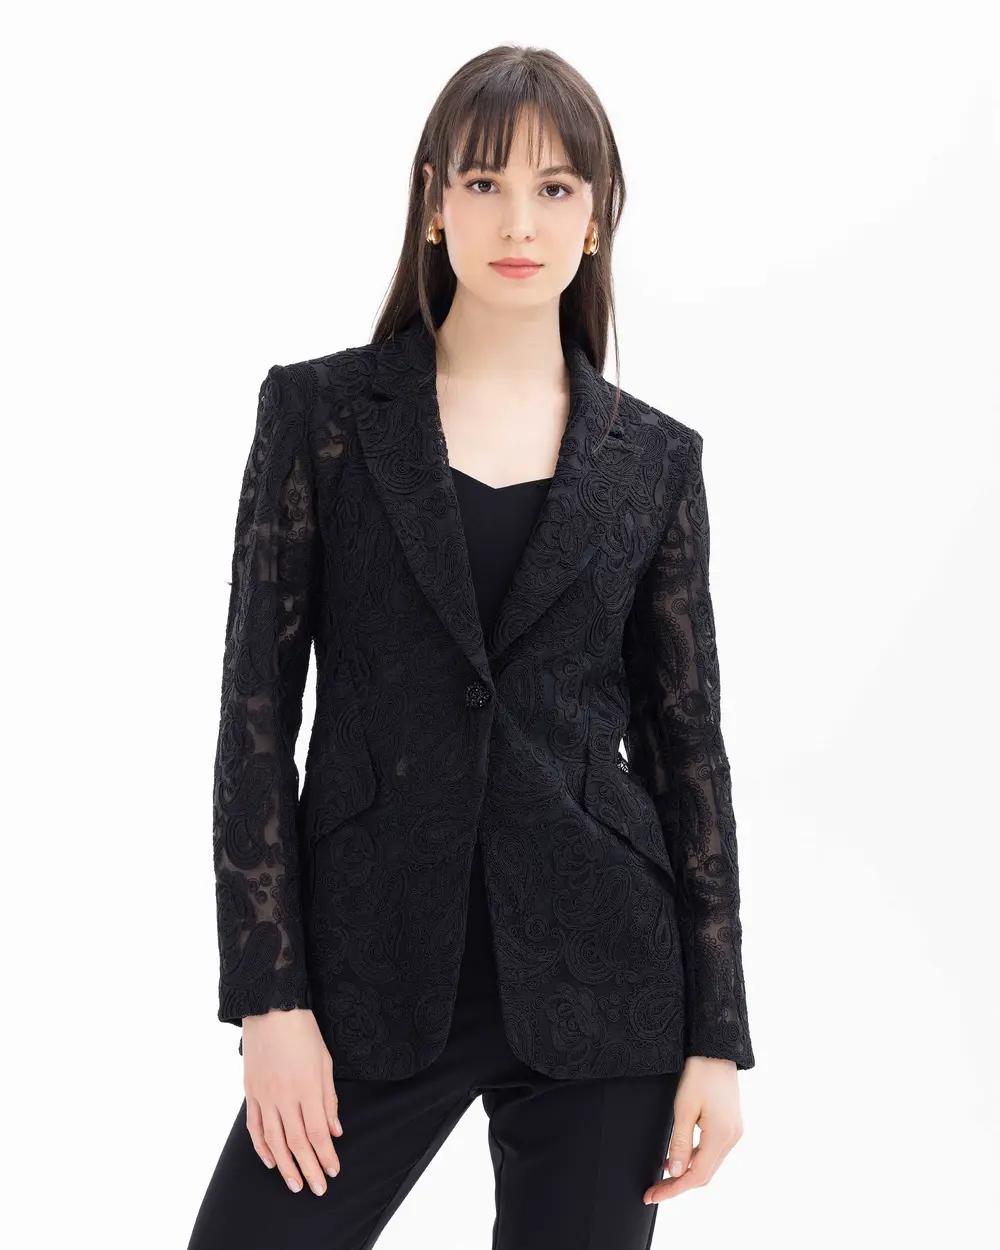 Buttoned Lined Lace Jacket